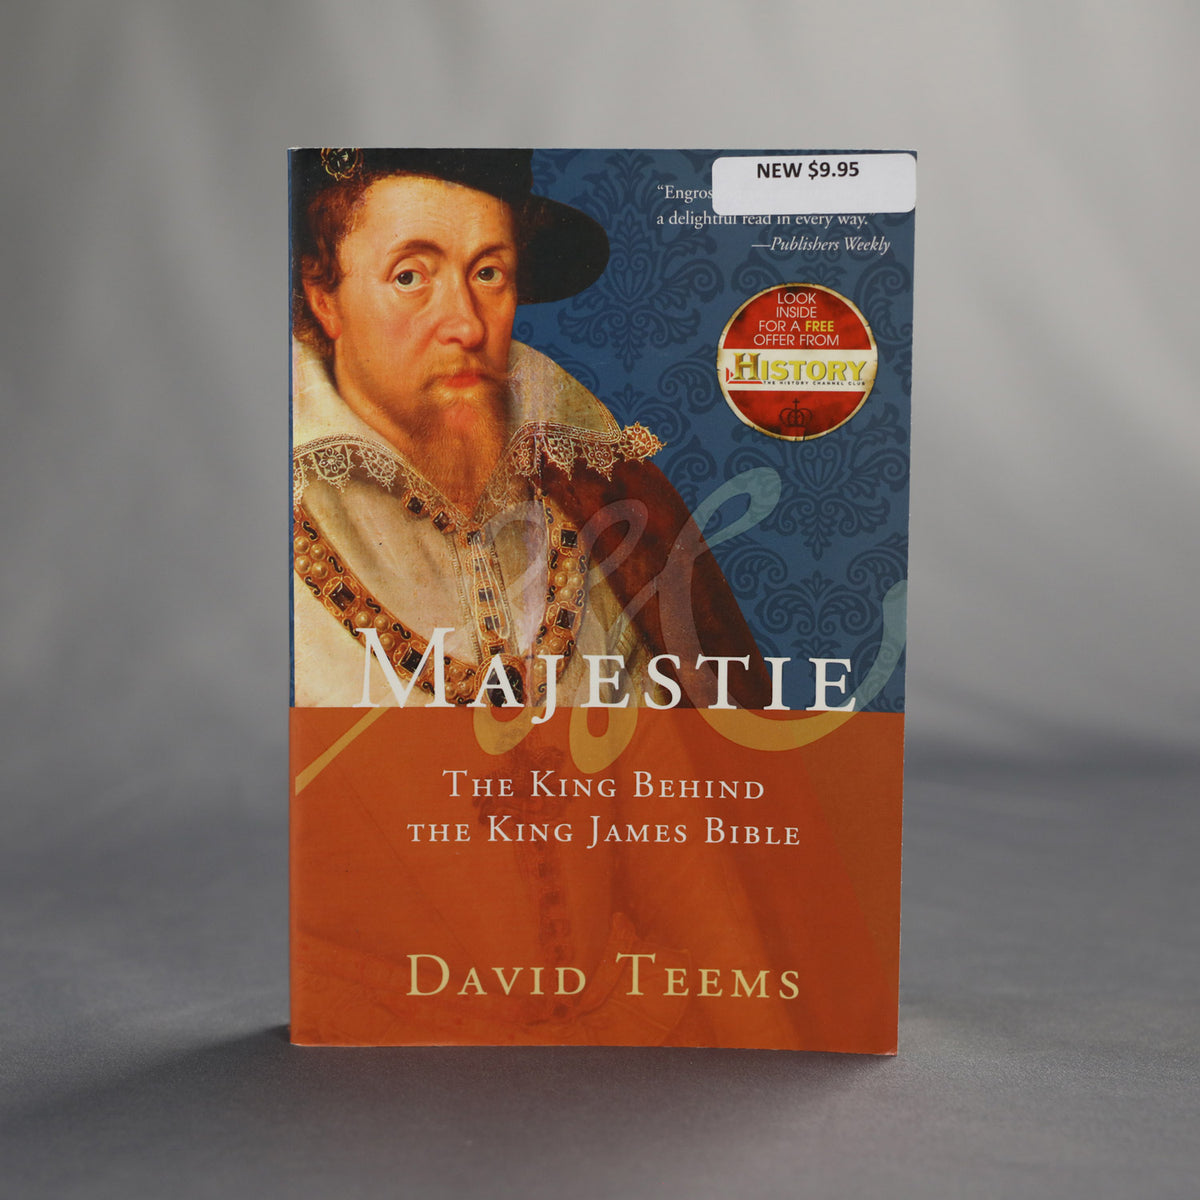 Majestie - The King Behind the King James Bible (Teems)